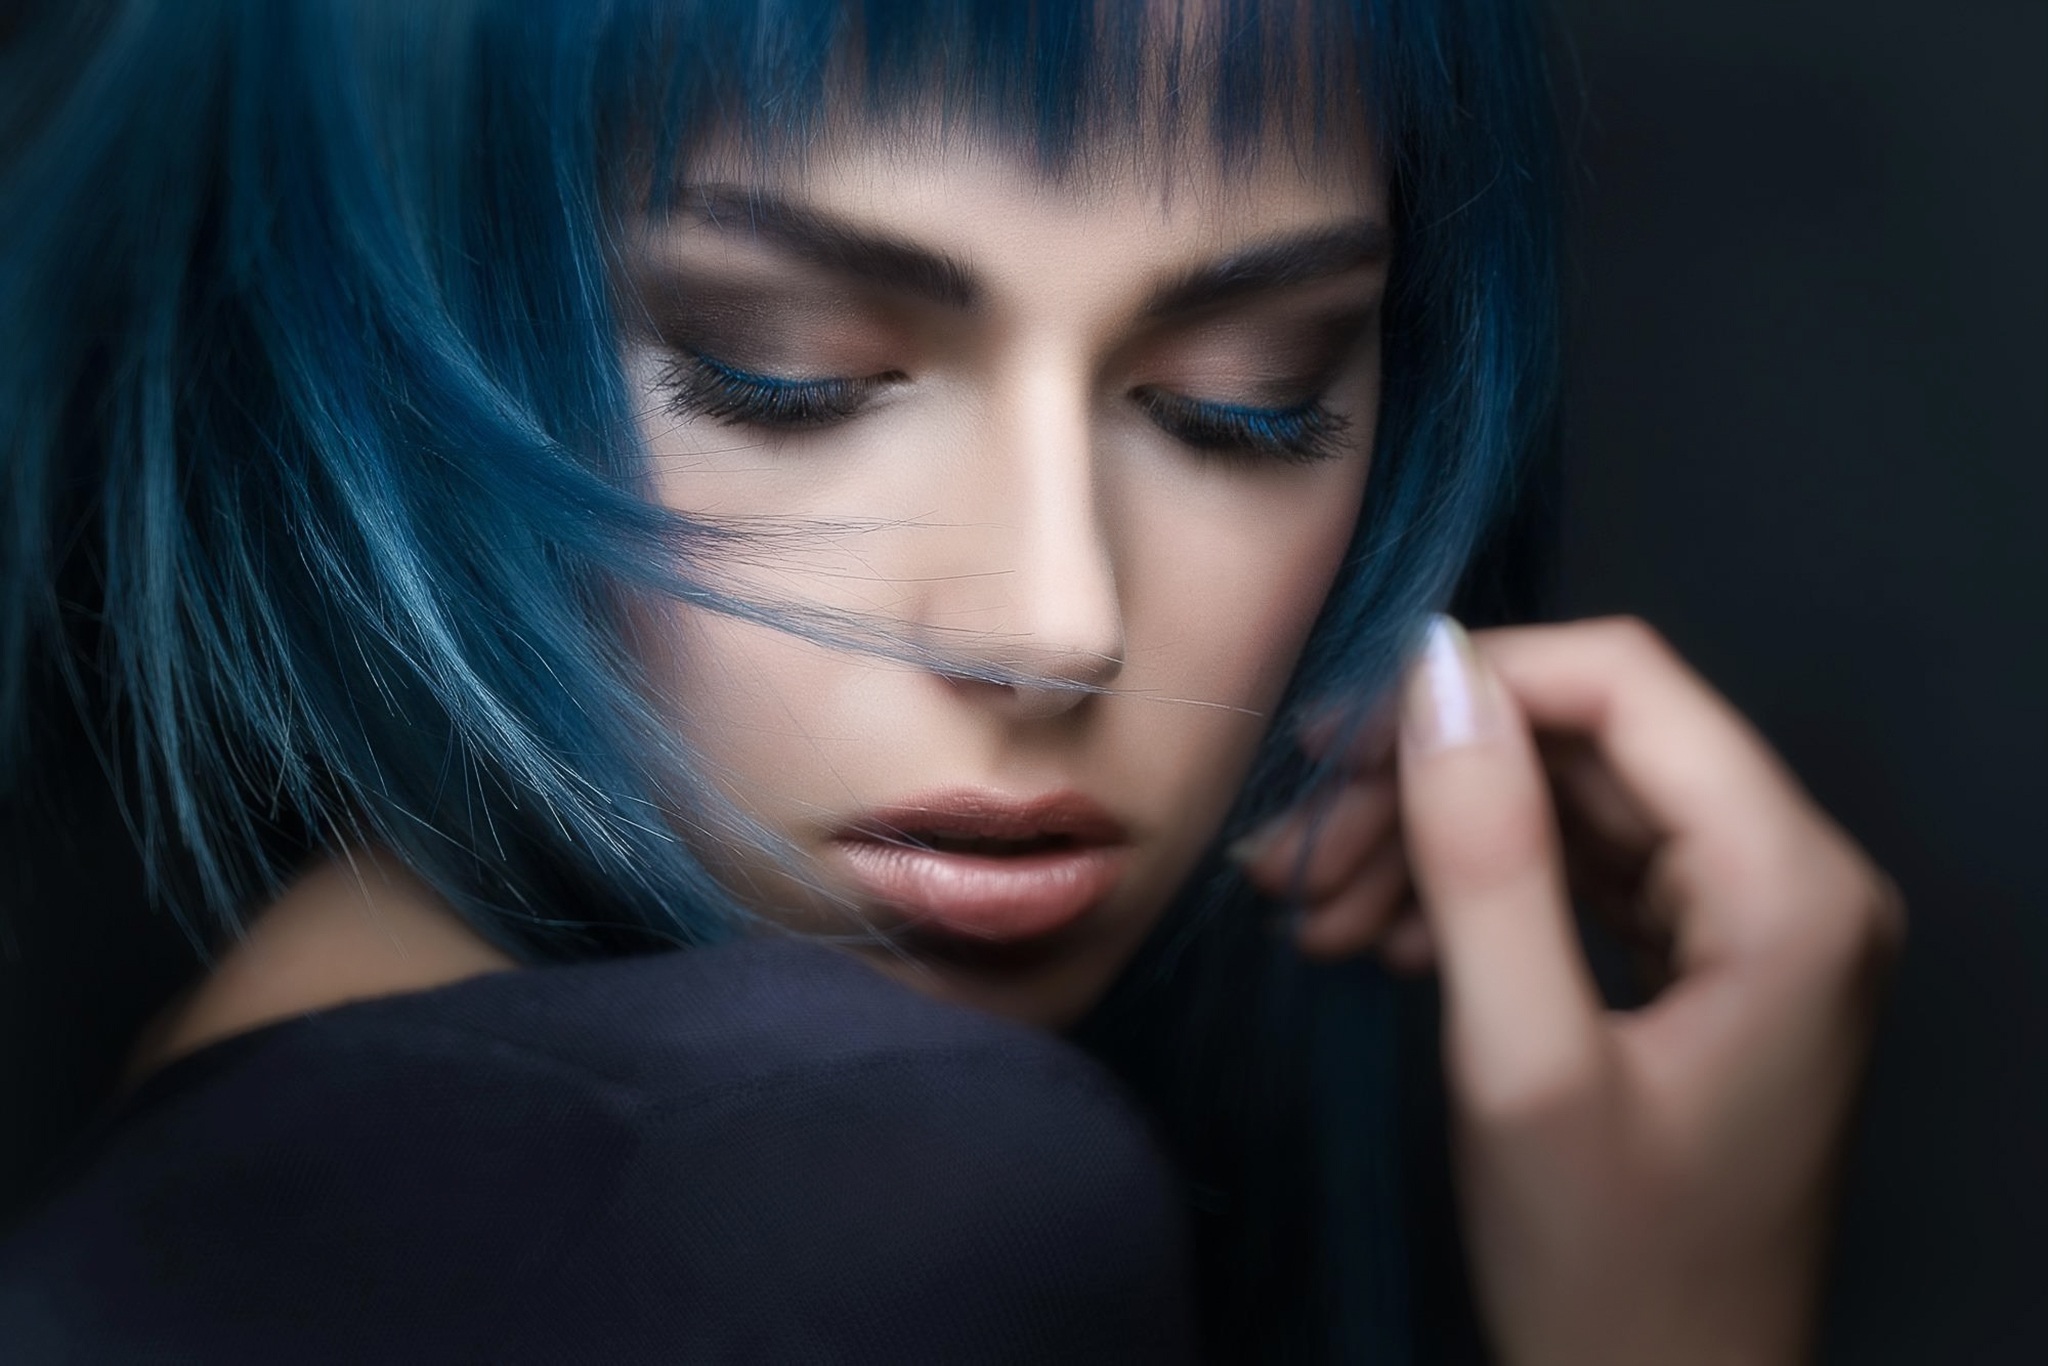 Woman with blue hair in a water reflection - wide 9